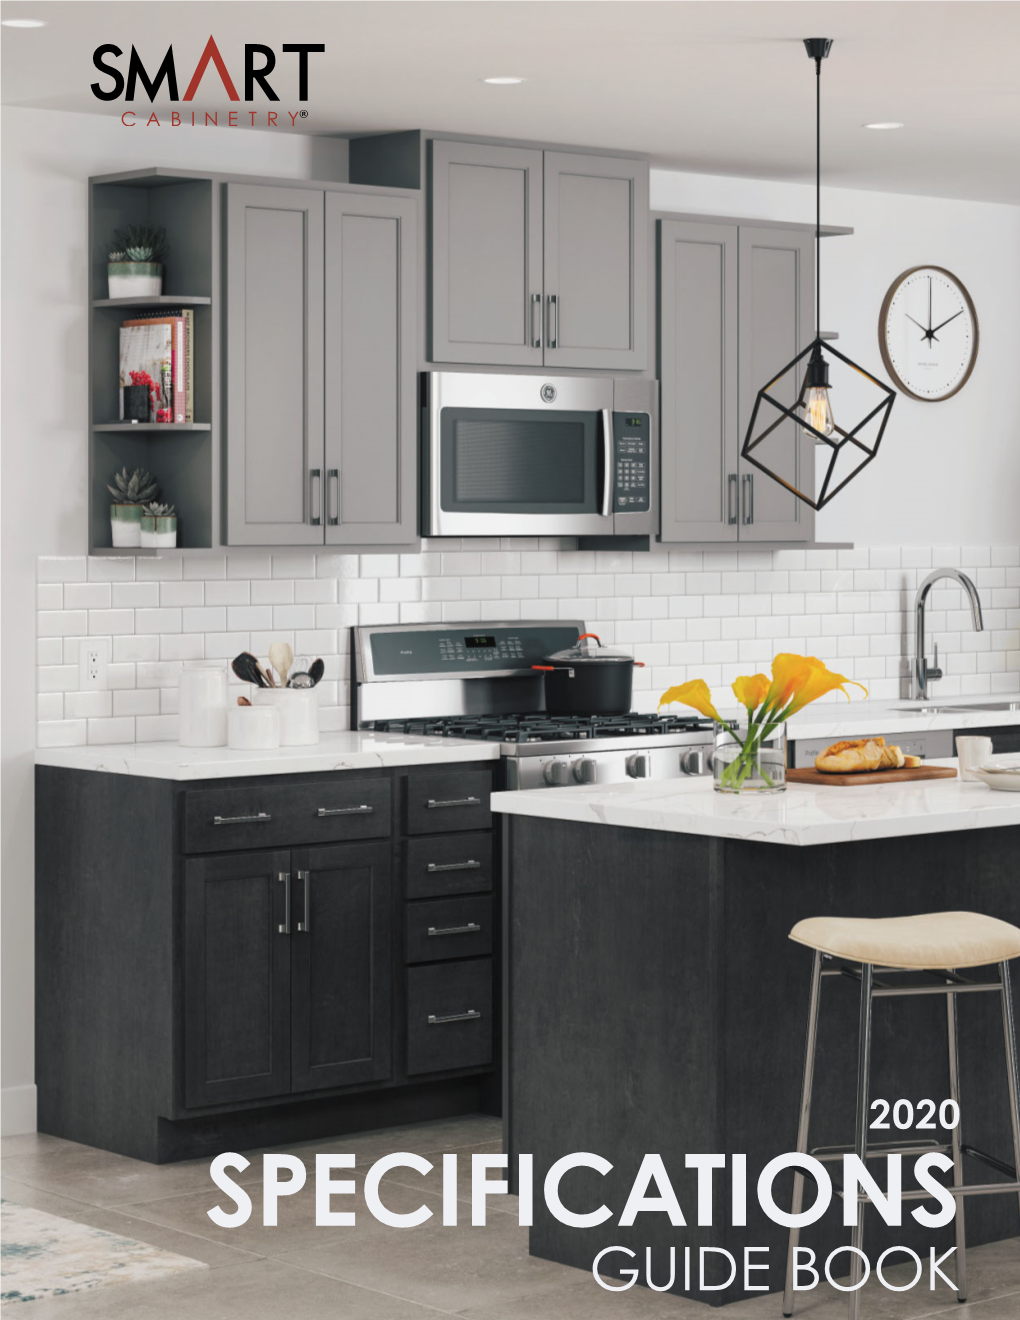 Specifications Guide Book Welcome to Smart Cabinetry